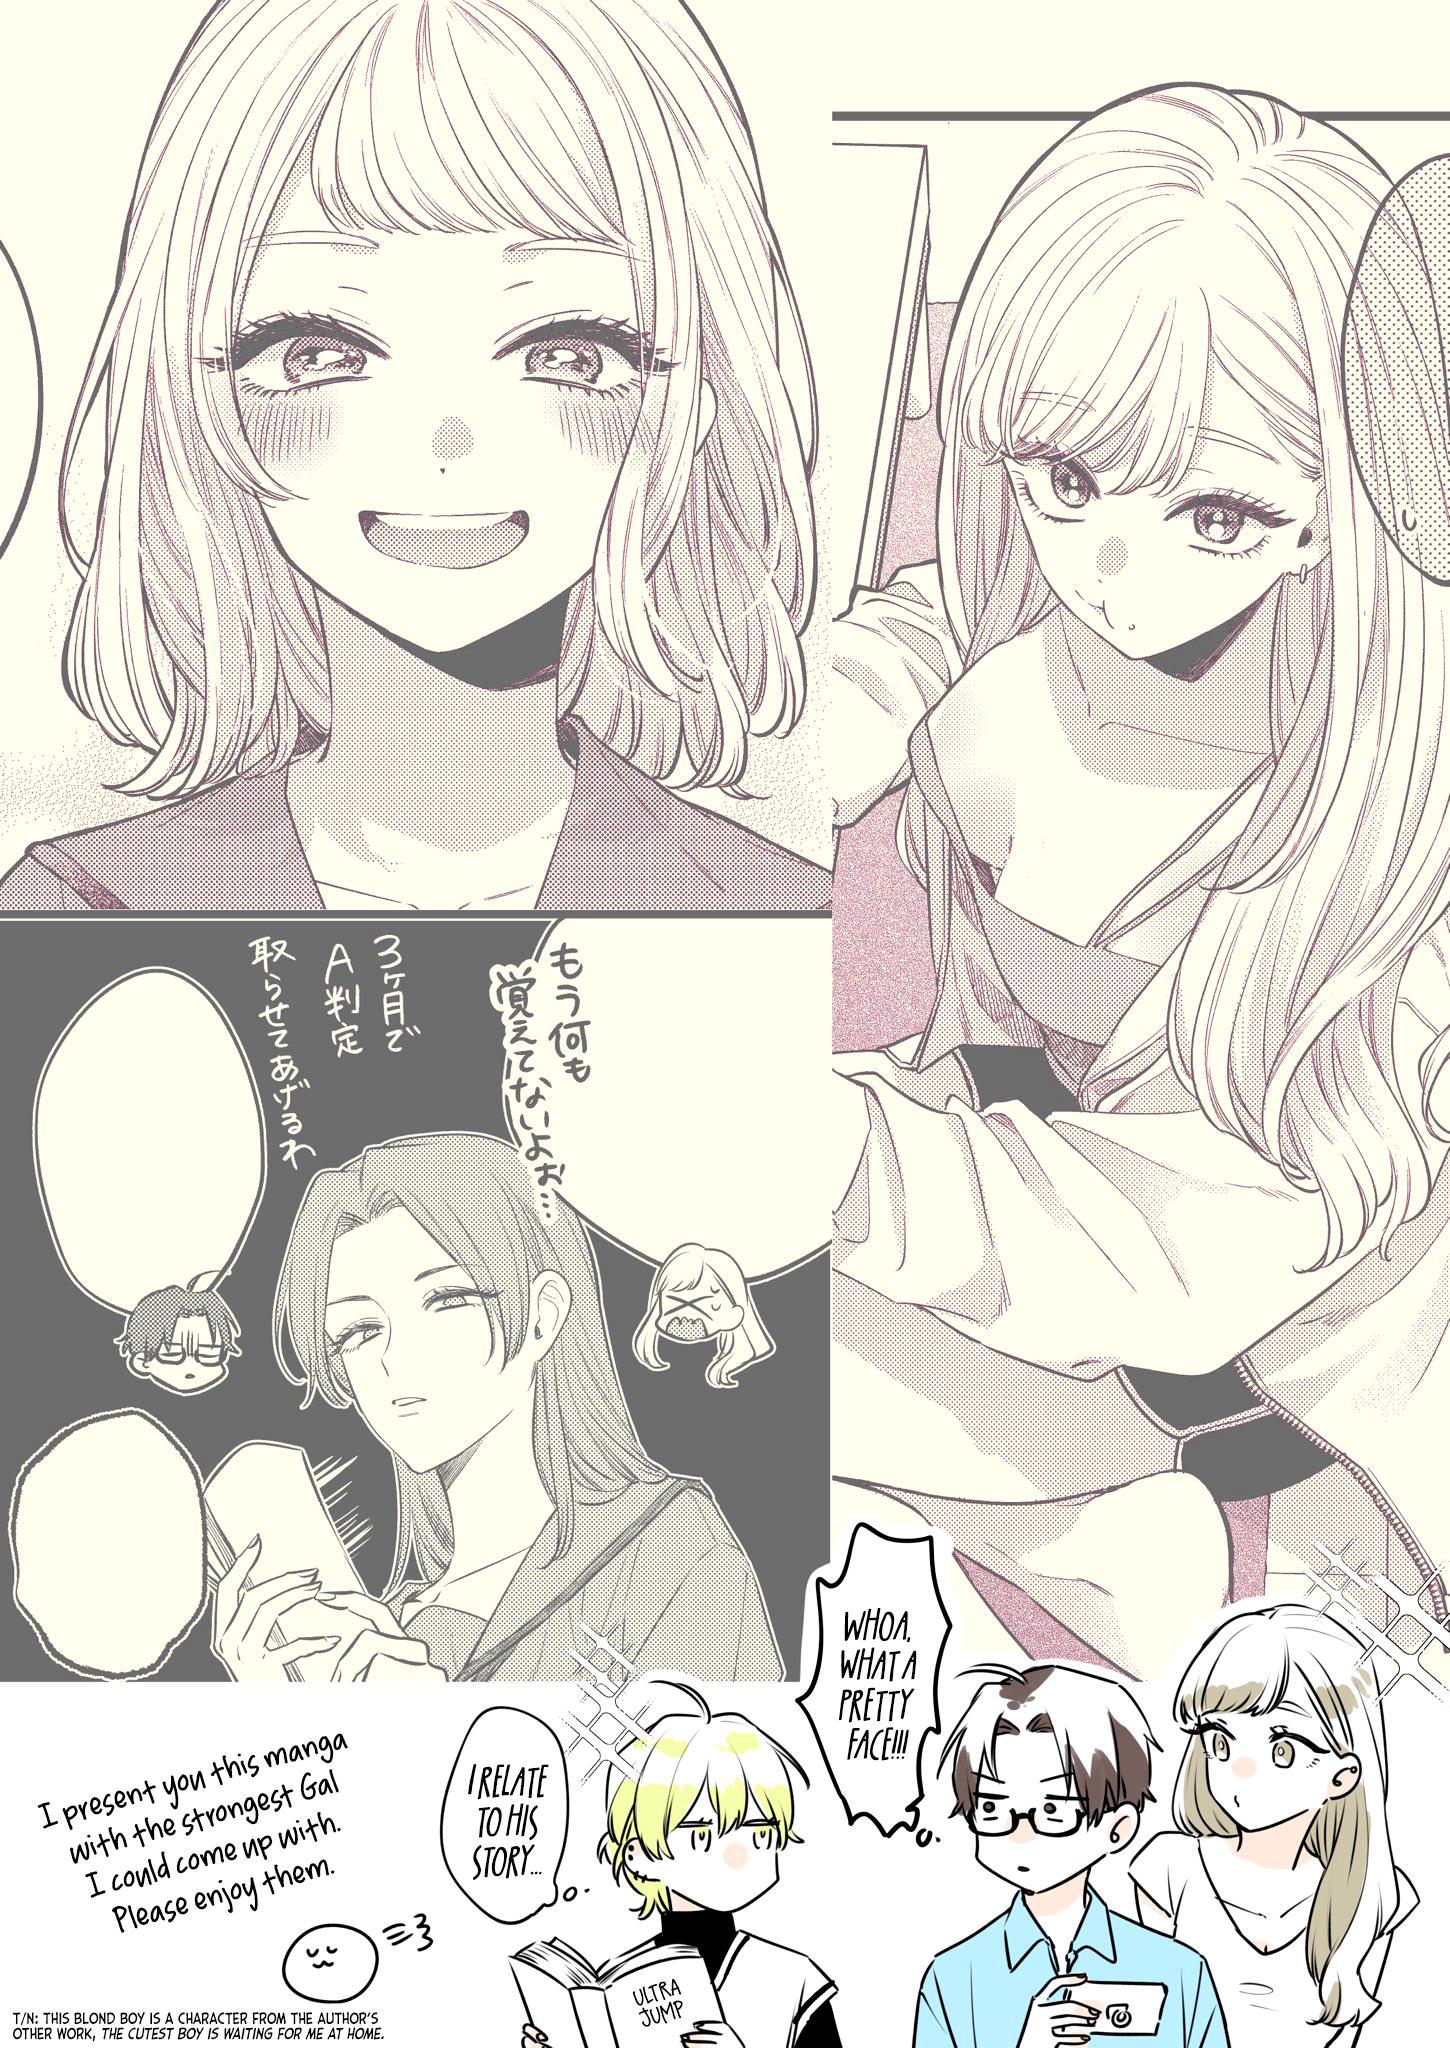 The Cutest Girl Closest To Me - chapter 1.5 - #2